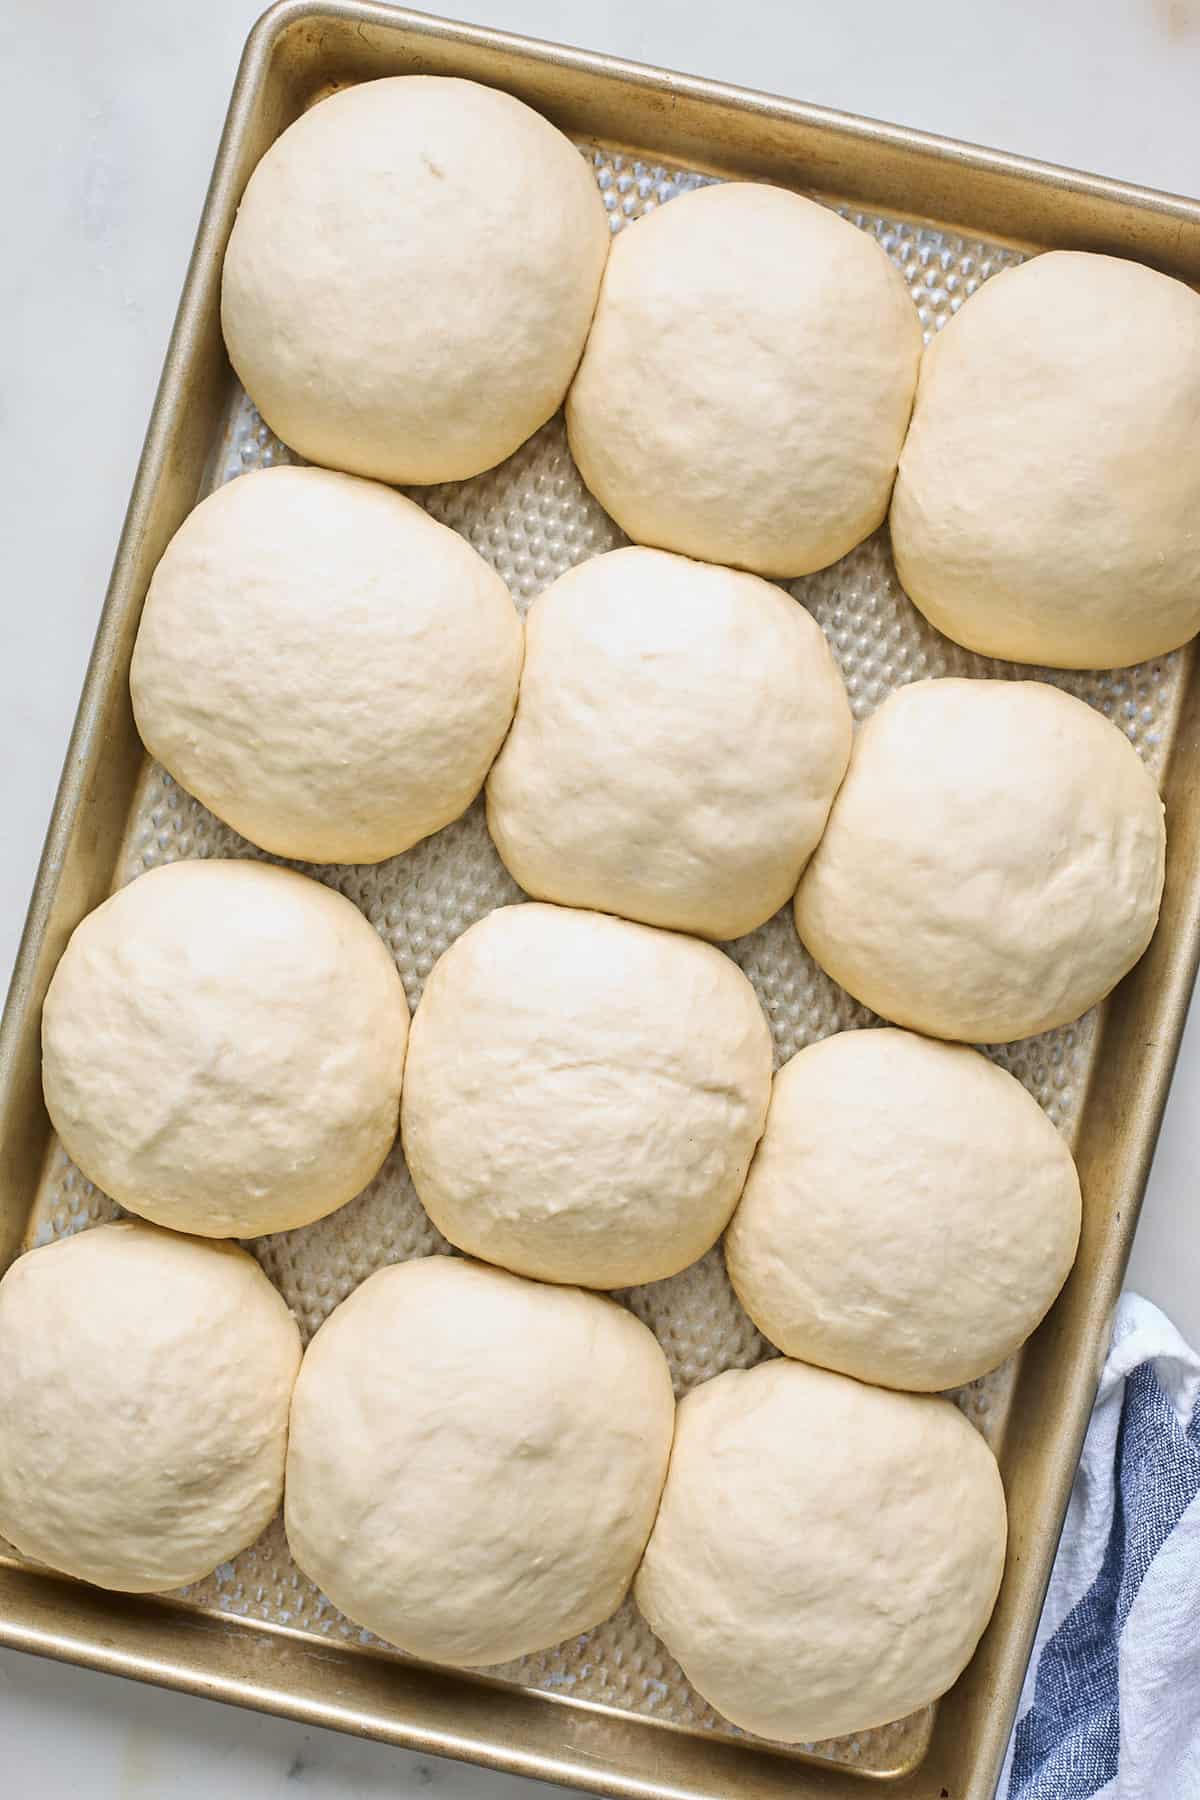 Dough balls are risen and added to a baking pan